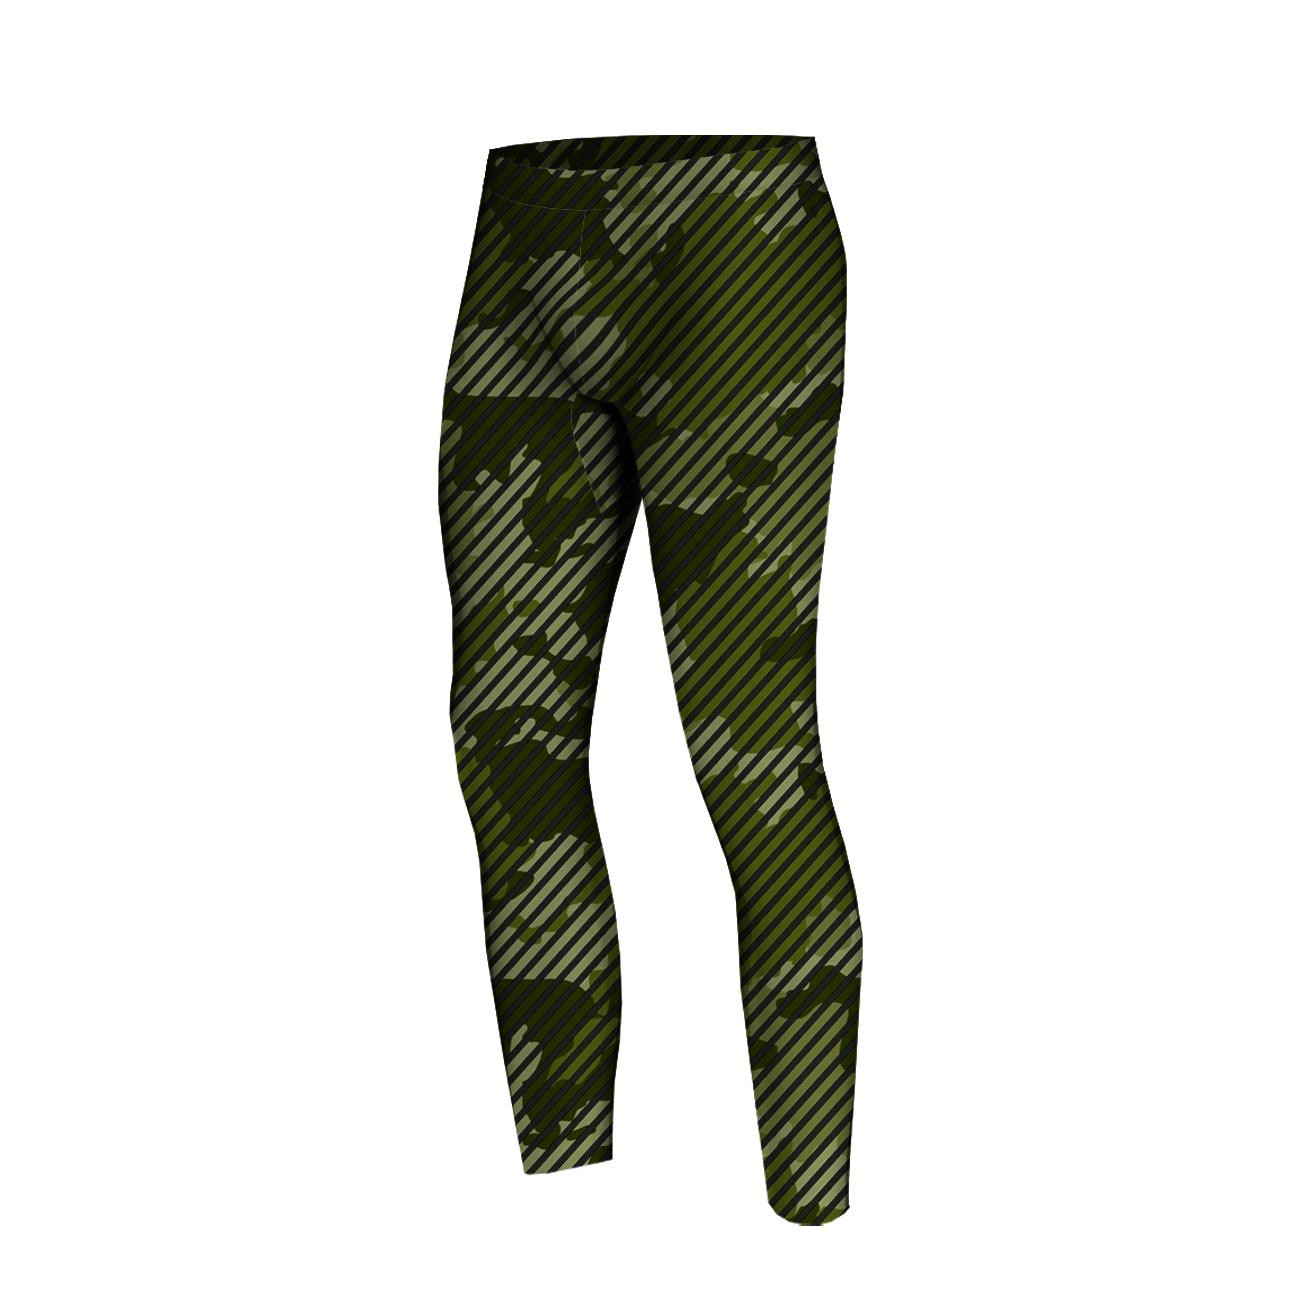 THERMO MEN'S SET (STEVE) - CAMOUFLAGE / STRIPES - sewing set